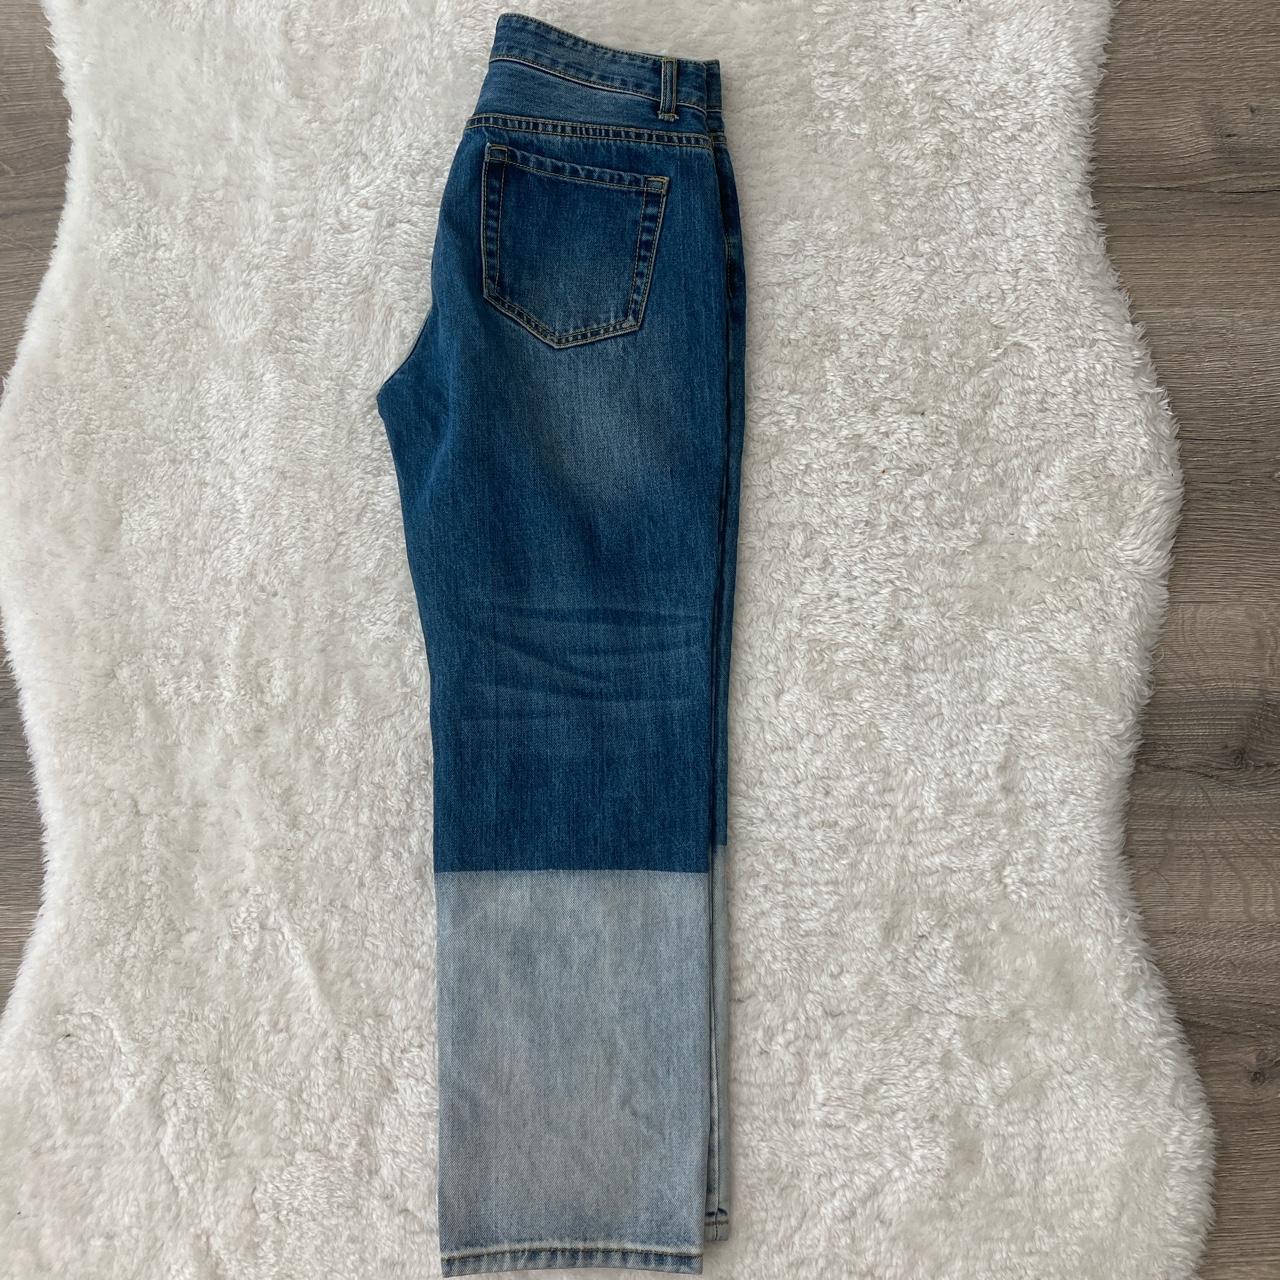 EVIDNT Women's White and Blue Jeans